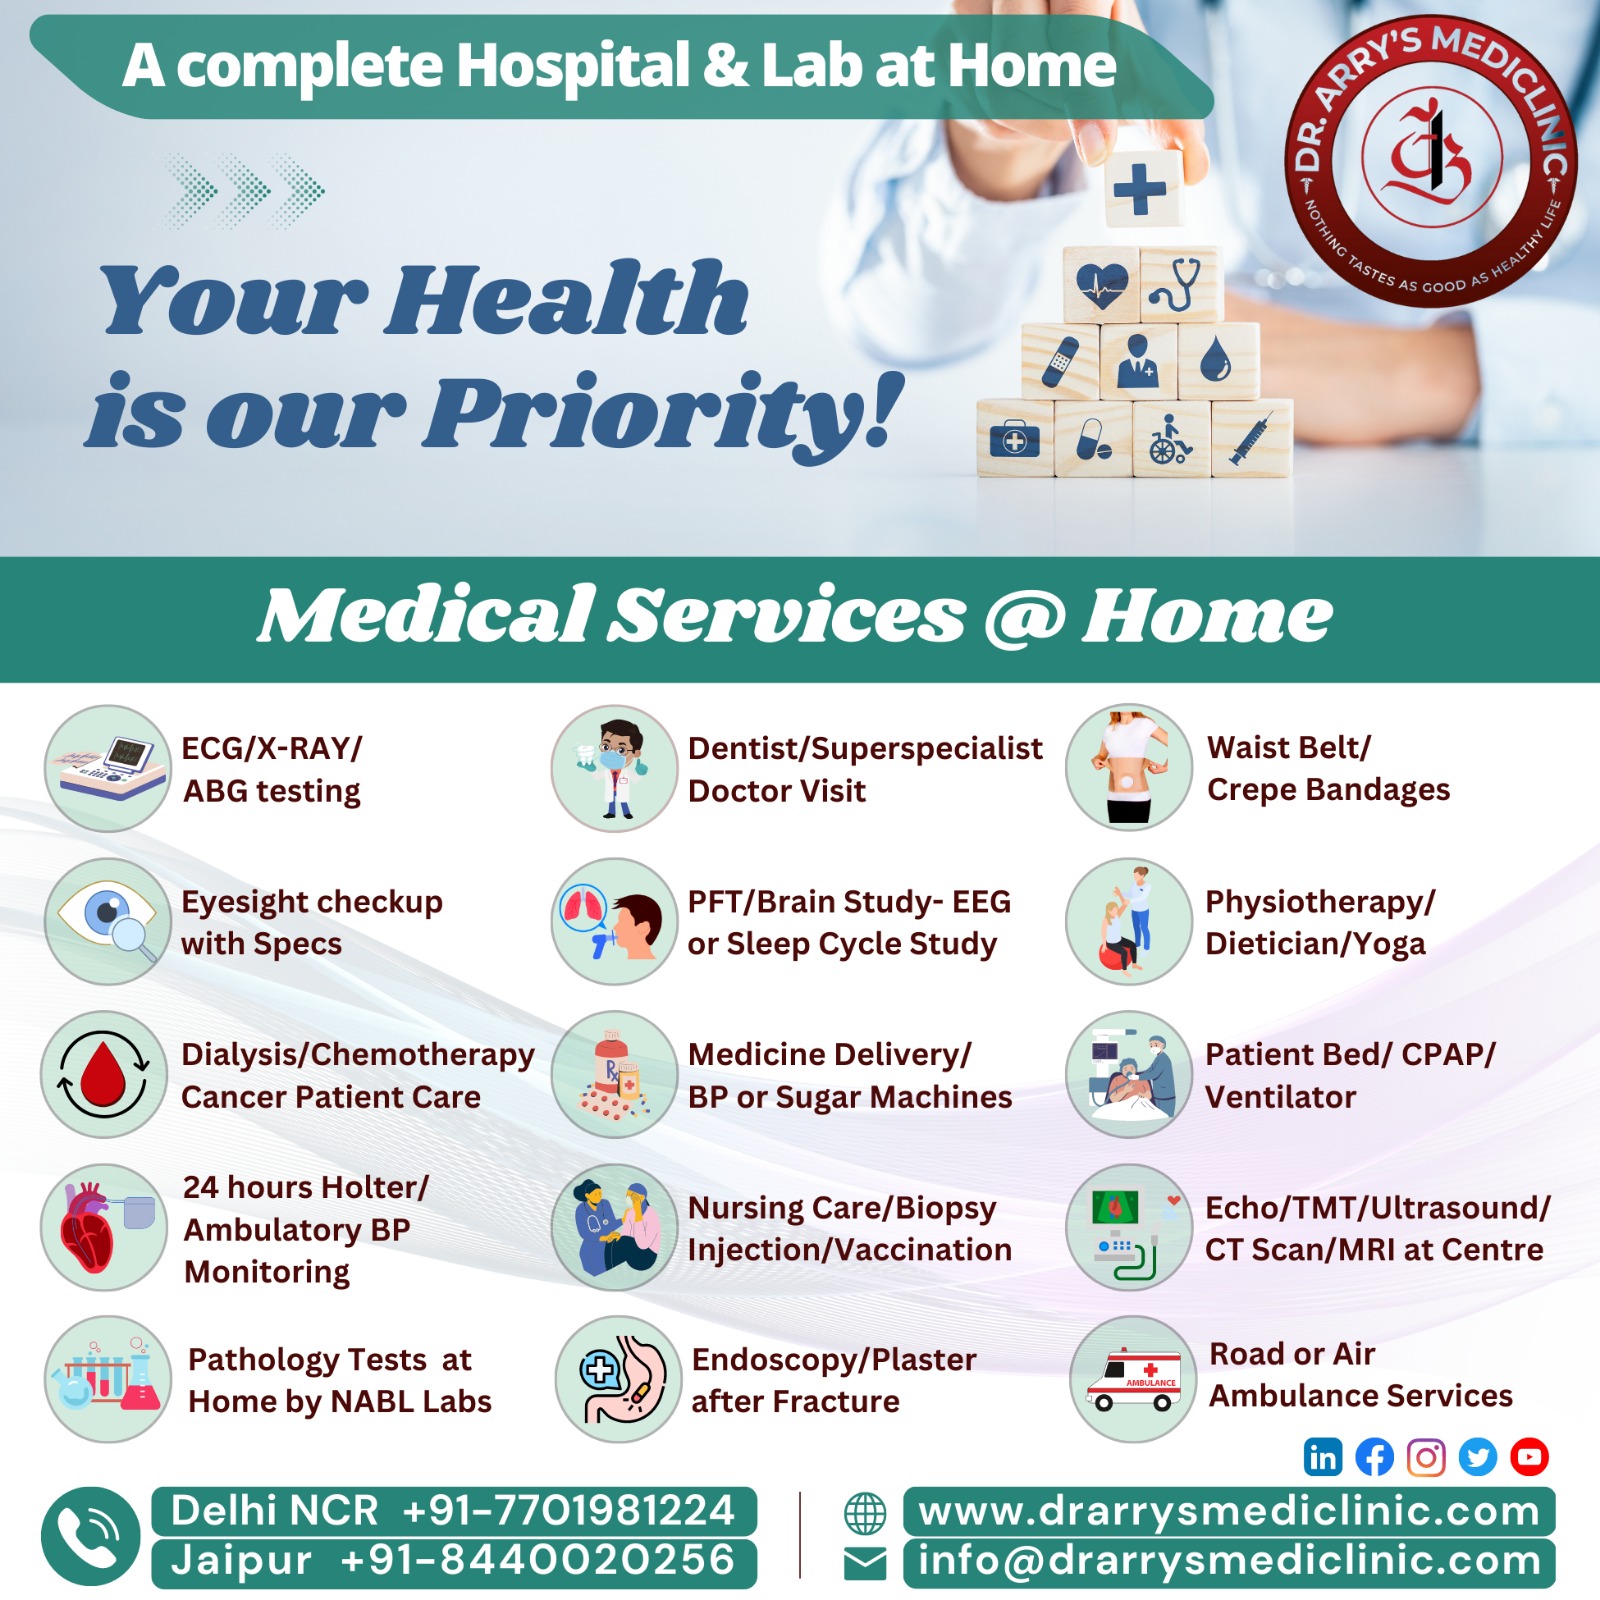 Dr.Arry's Mediclinic Services